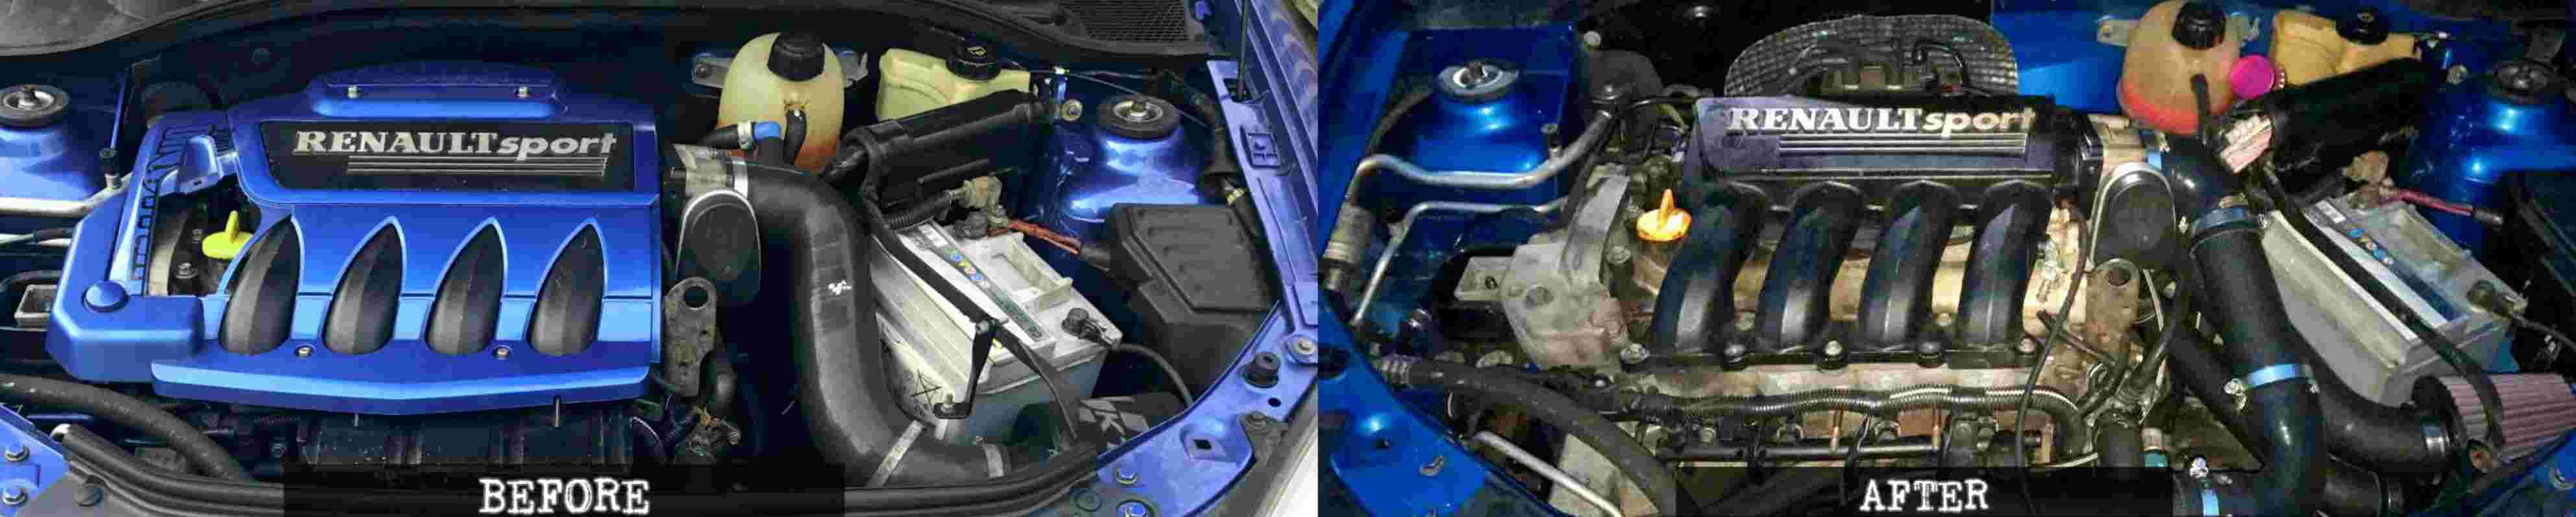 before-after-comparison-fitted-turbo charger